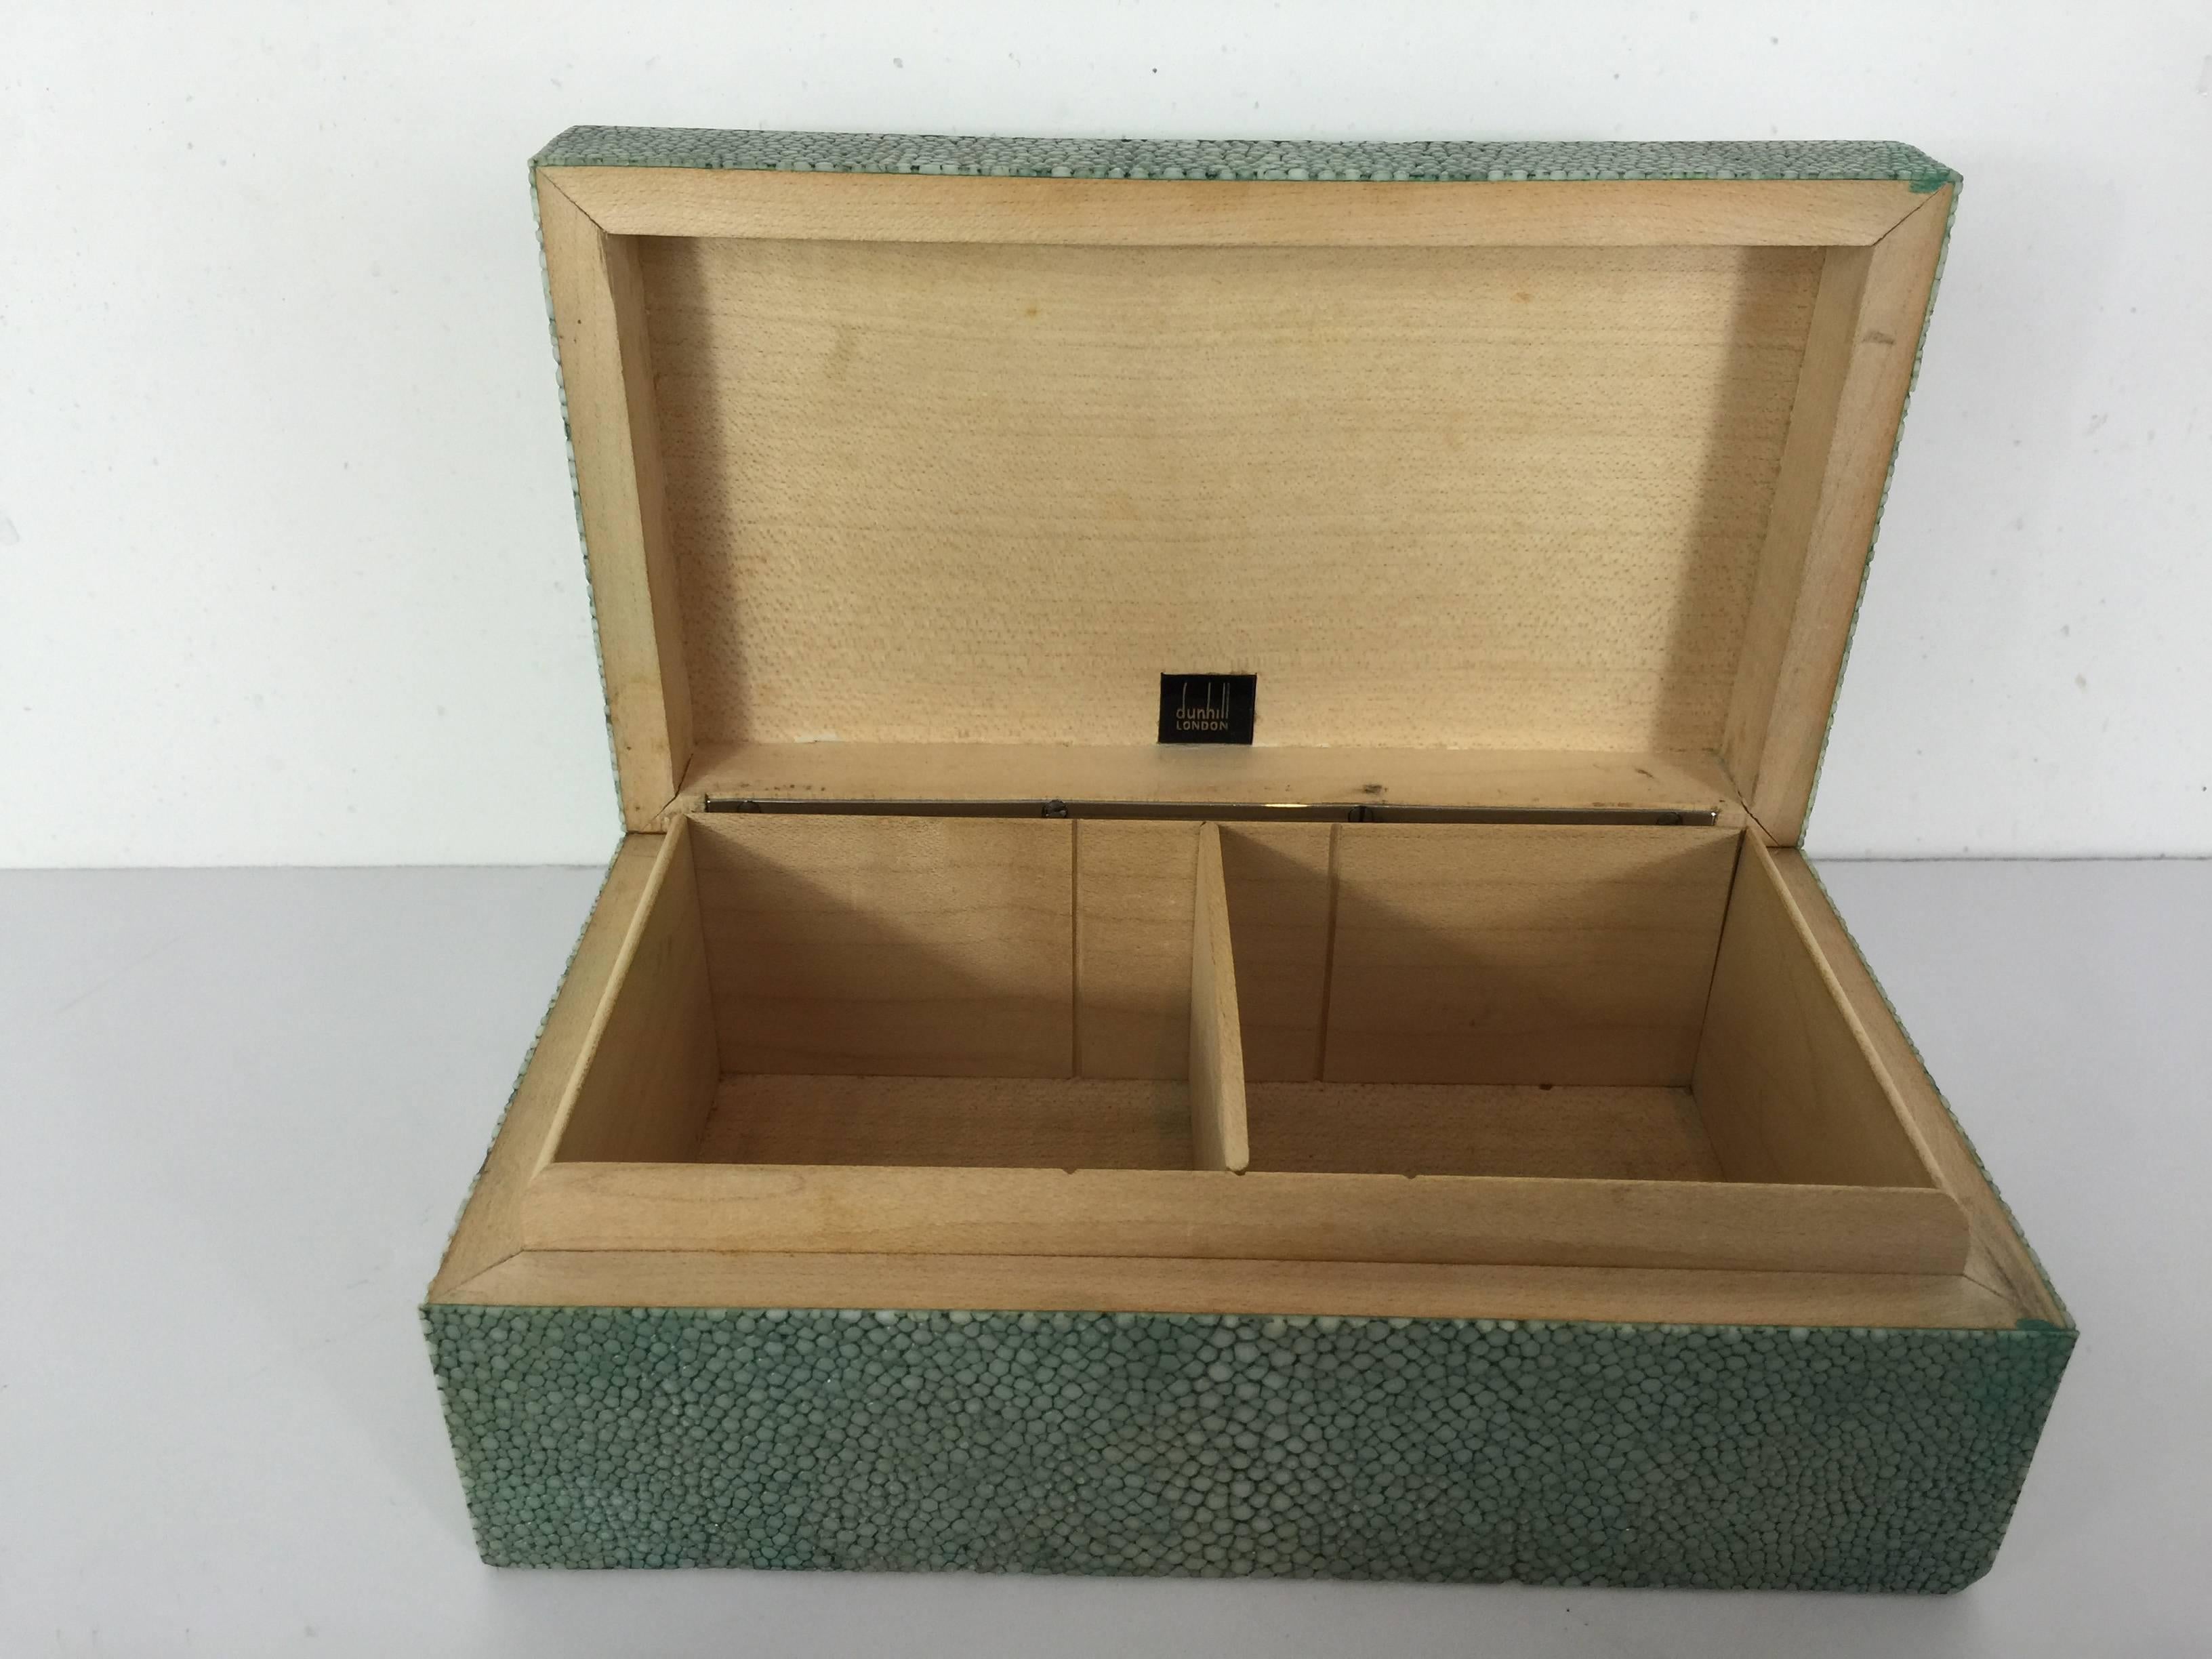 Art Deco Dunhill Shagreen table box, of rectangular form with bookmatched green and white Shagreen with adjustable divided wooden interior. Signed on the interior of the lid "Dunhill, London". The interior measures 6" wide x 3"